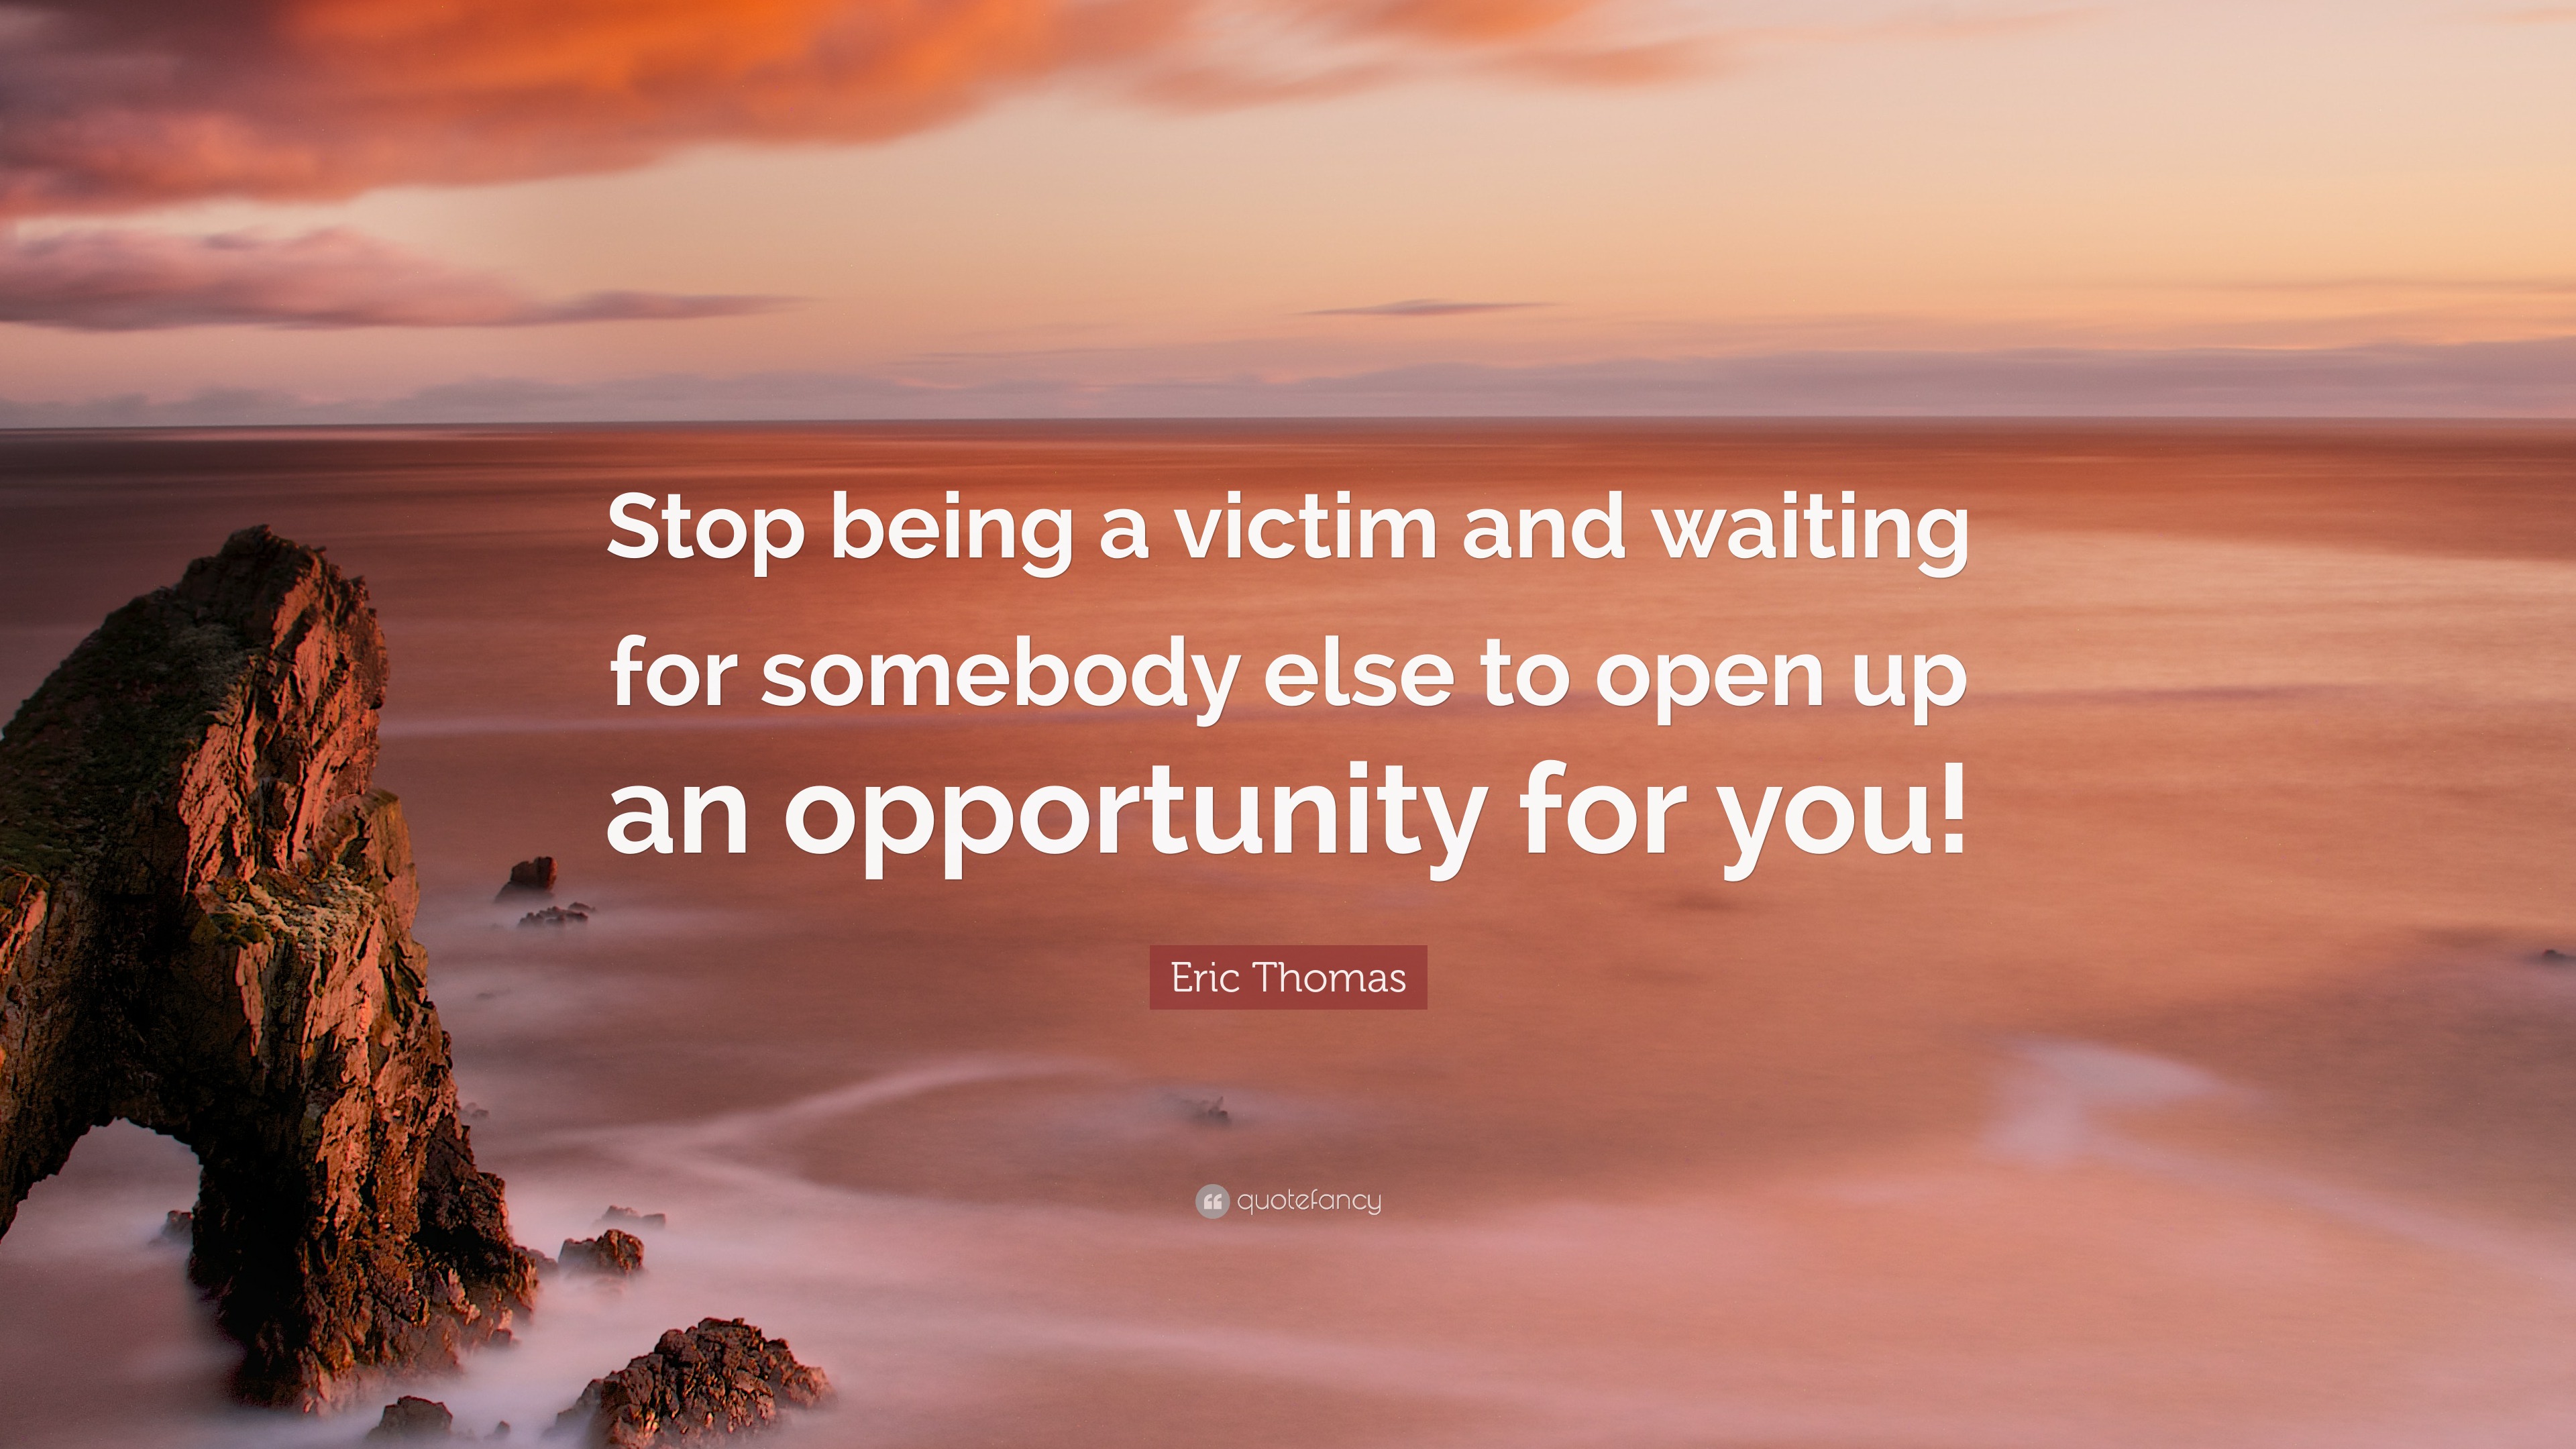 Eric Thomas Quote: “Stop Being A Victim And Waiting For Somebody Else To Open Up An